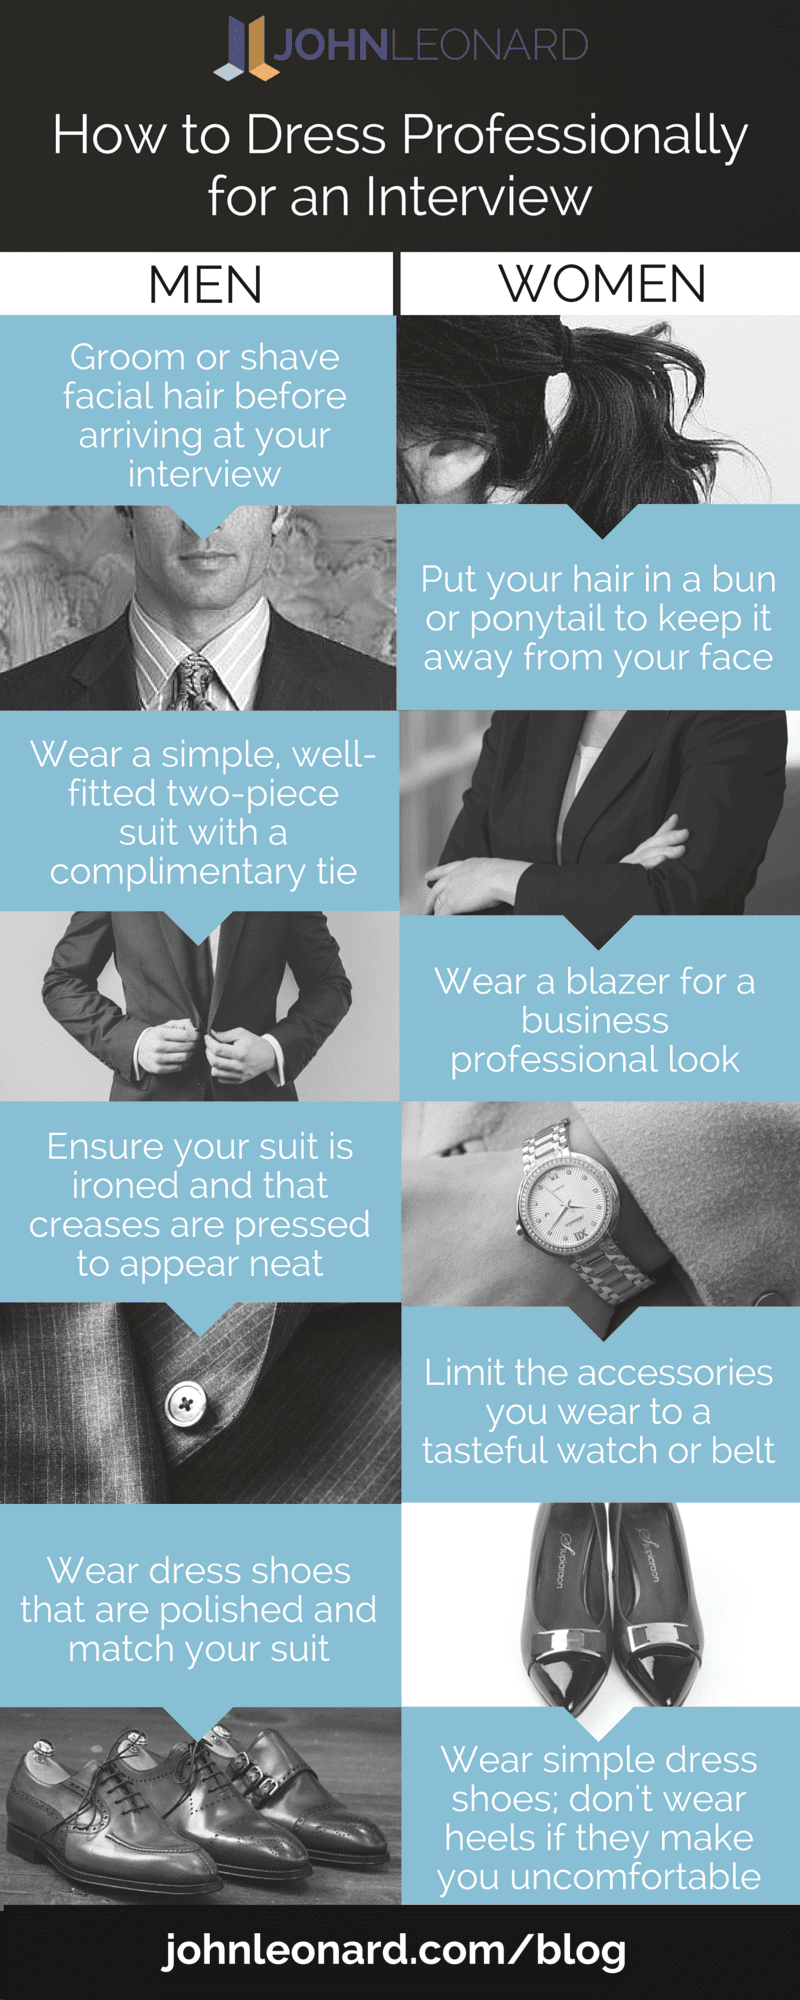 Interview_Dress_for_an_Interview_Infographic.png